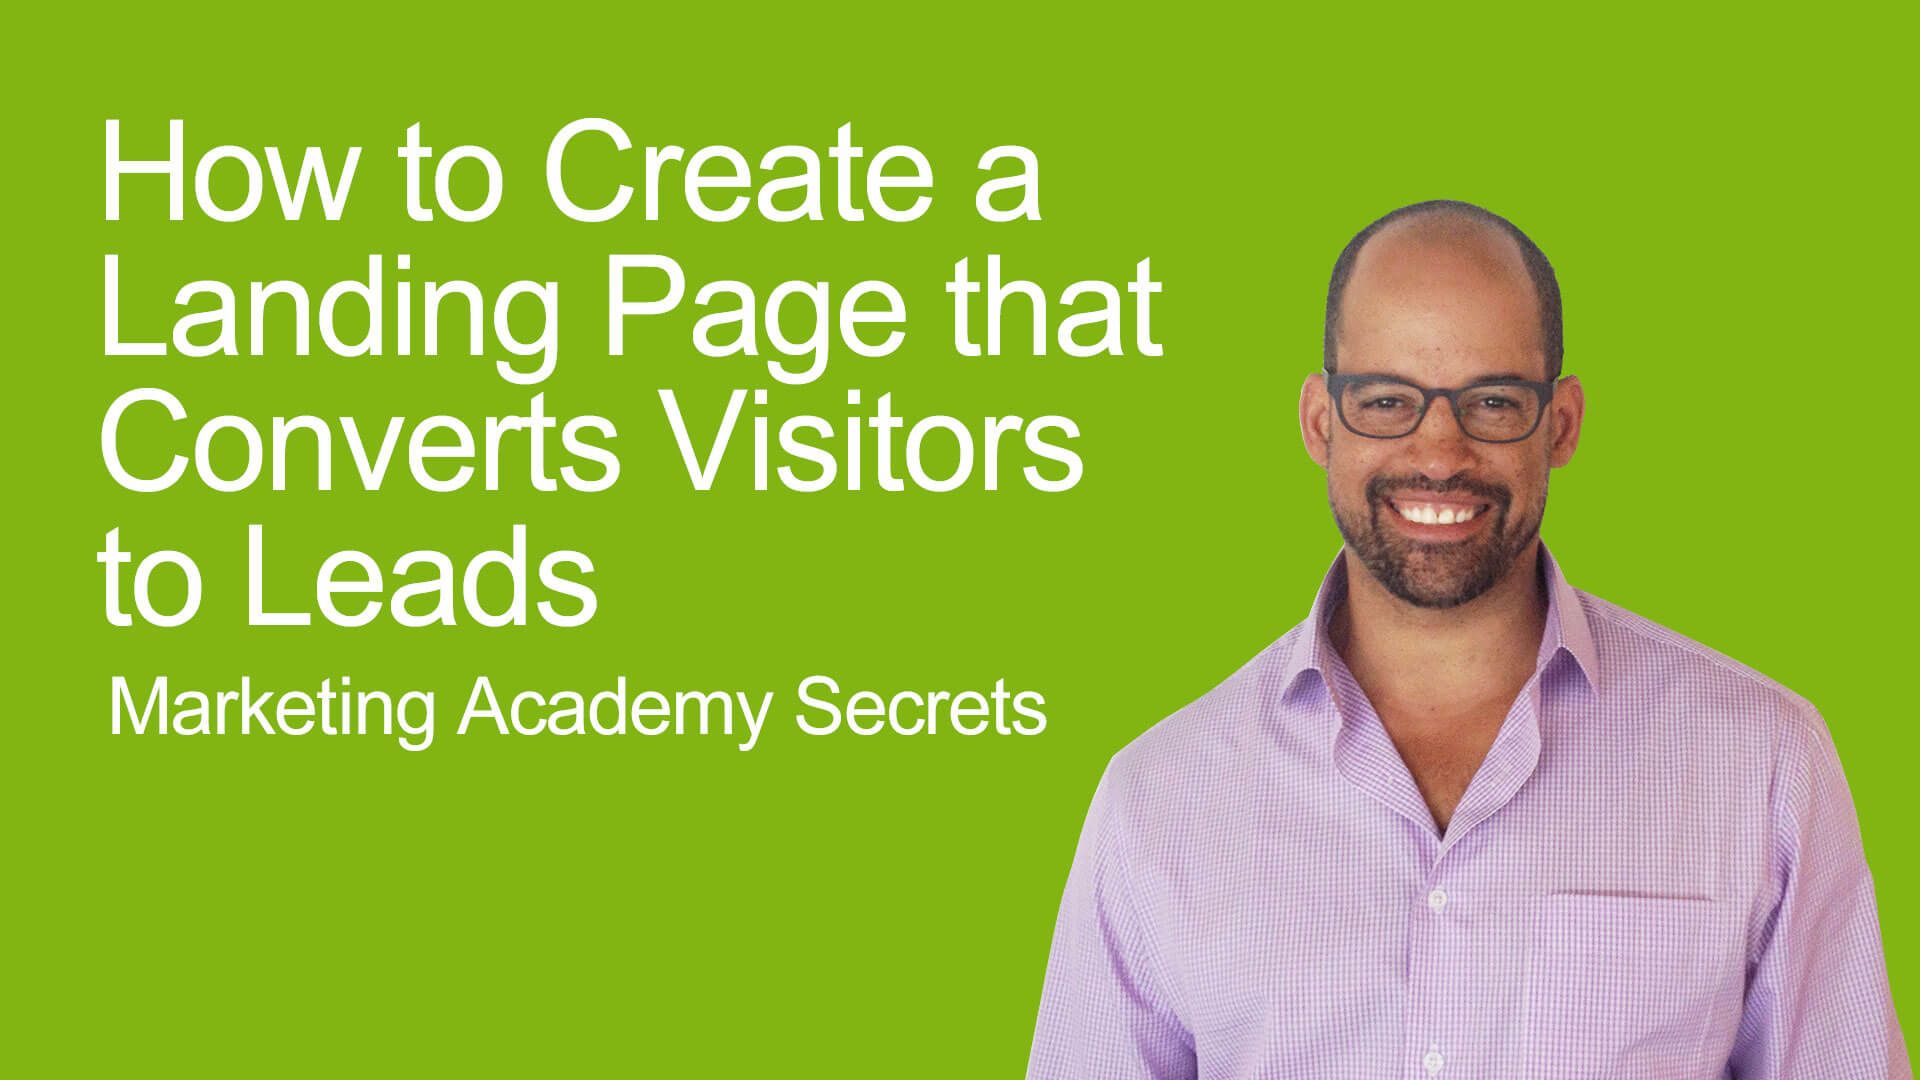 Increase Real Estate Lead Conversion Using LeadPages